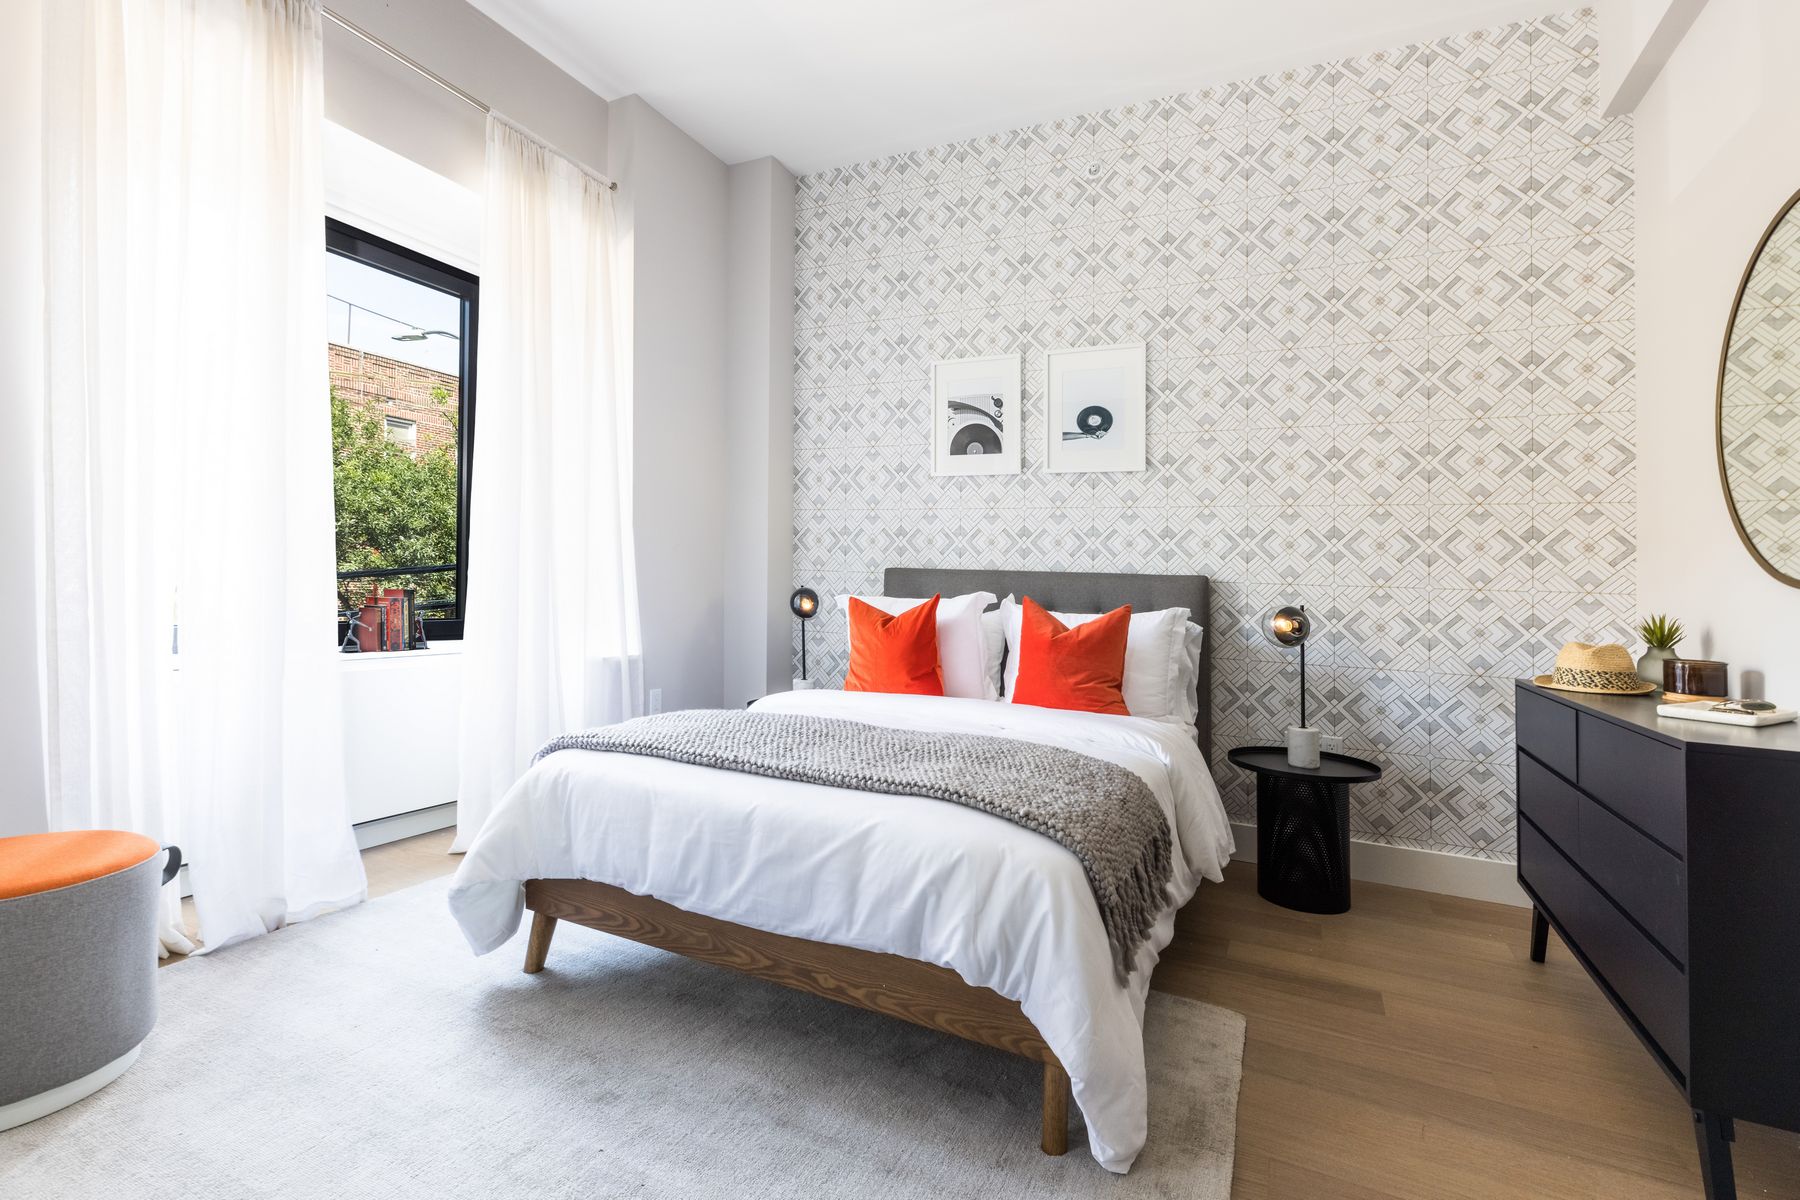 Bright modern bedroom, medium wood fream with grey fabric headboard, orange and white bedding, modern night stand with light, wood floors, dark drawer dresser, white walls with wallpaper patterned accent well behind bed, window on side with white curtains, high ceilings